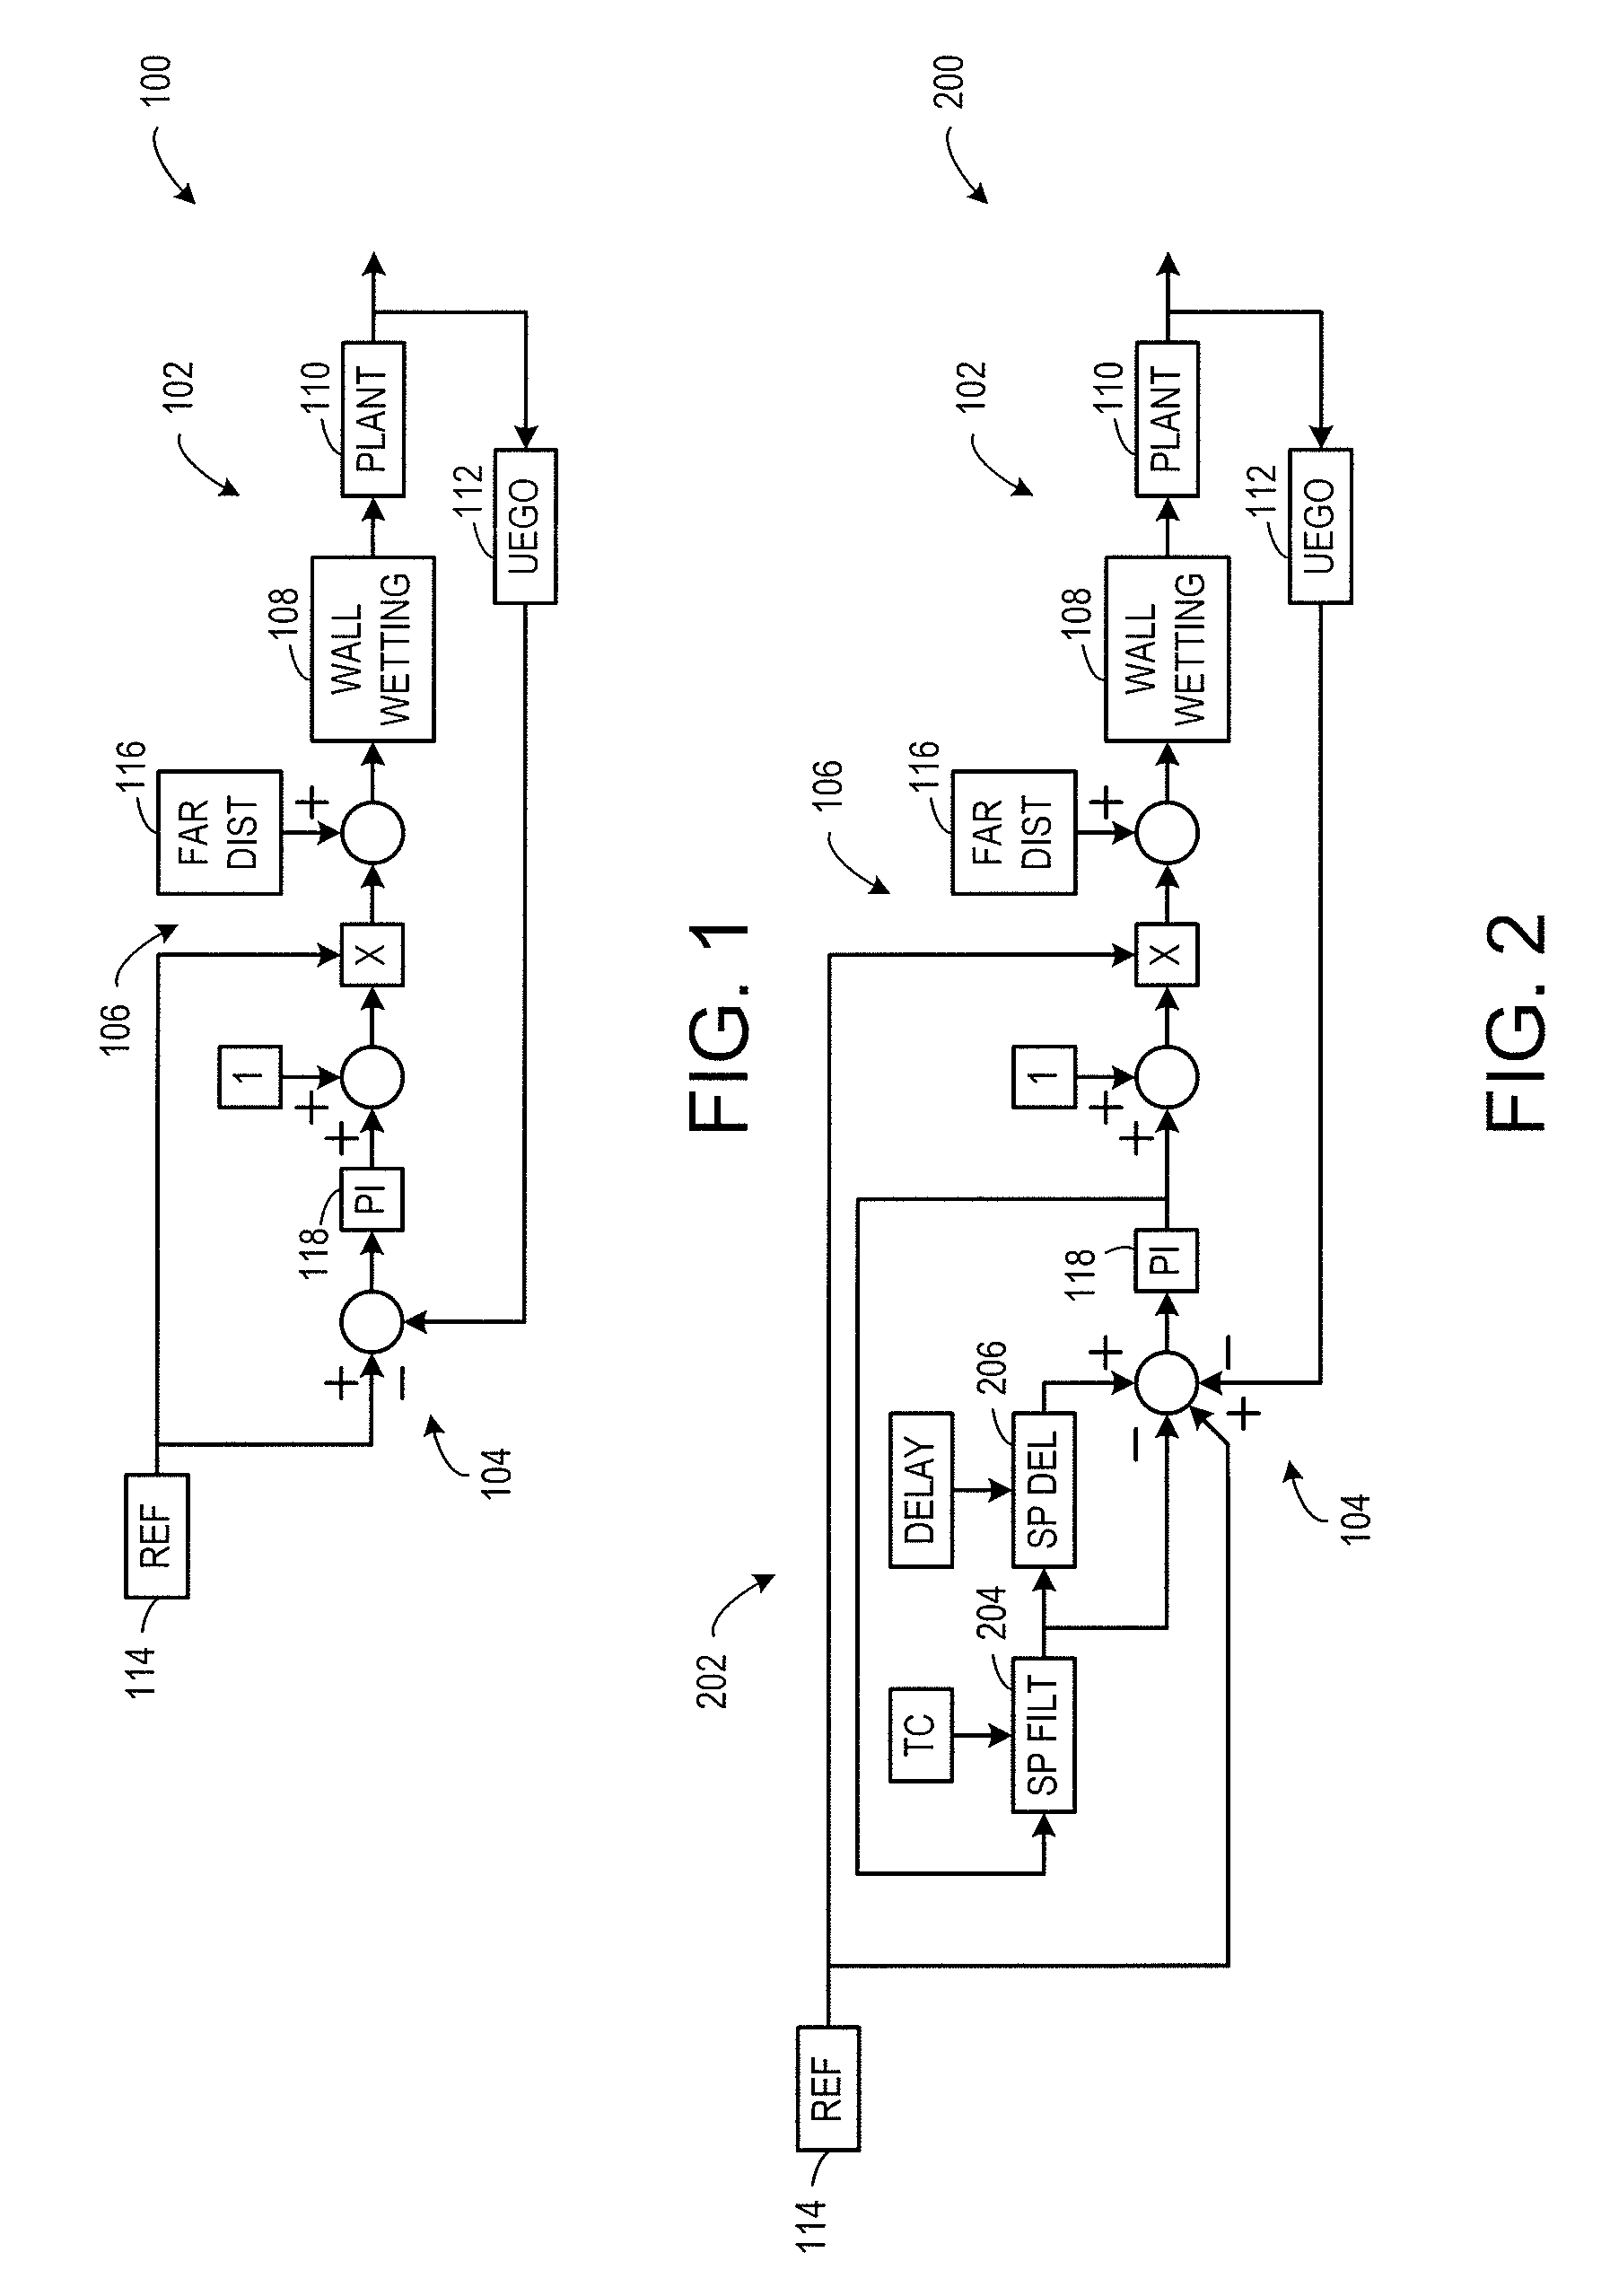 Delay compensated air/fuel control of an internal combustion engine of a vehicle